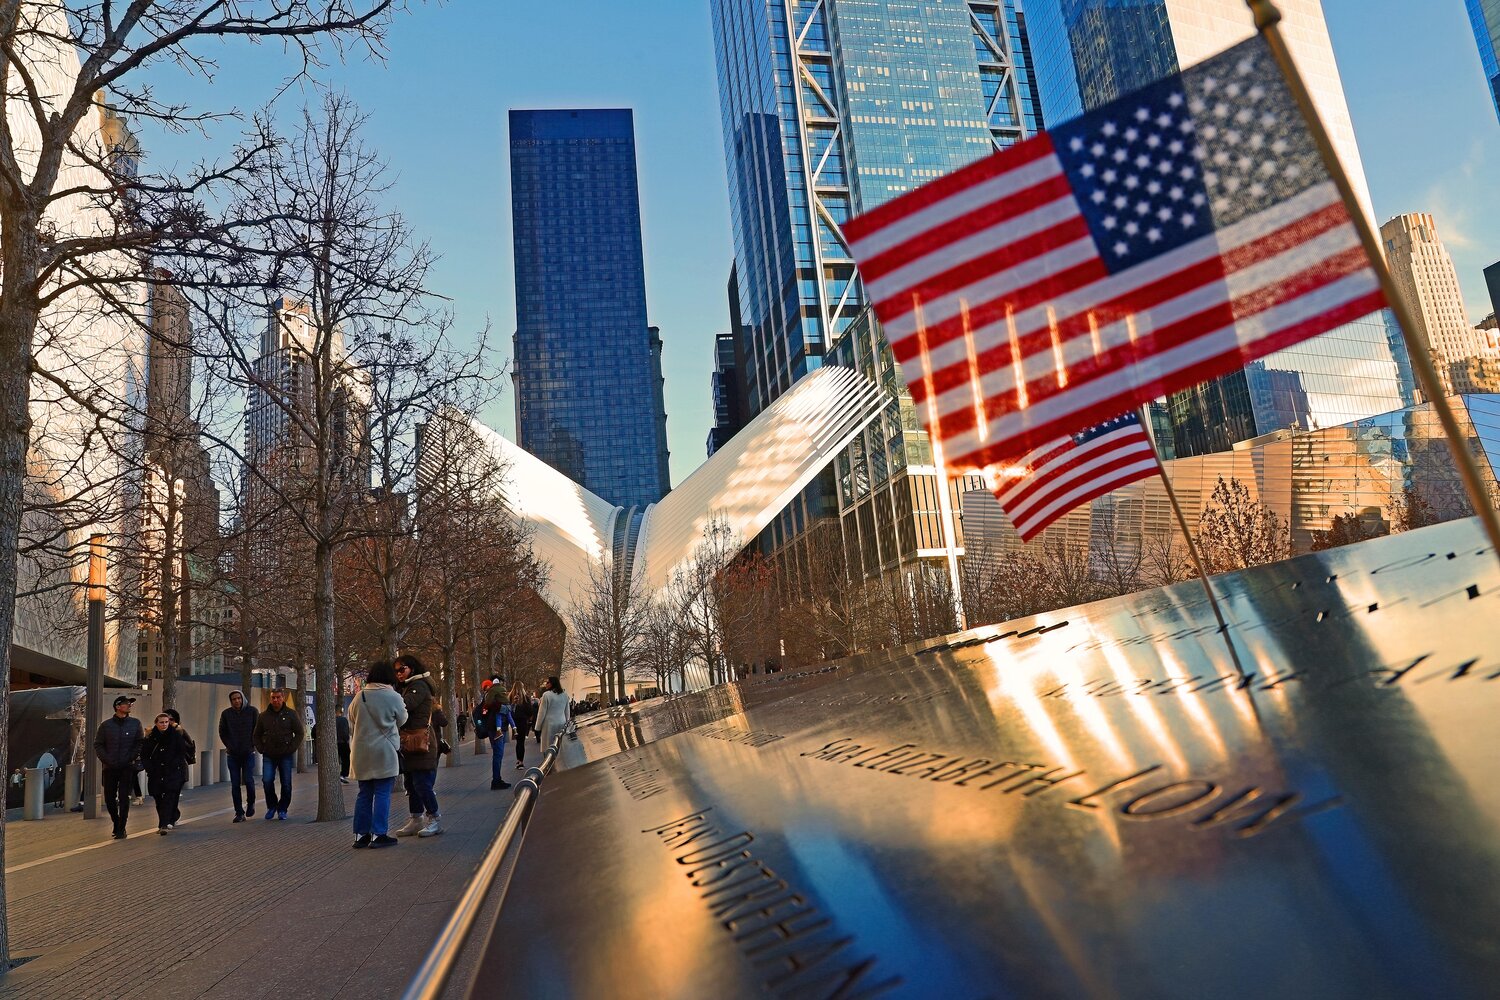 Since the completion of the National 911 Memorial and Museum, I have been able to visit several times the same site where I ministered from September to October 2001. This photo was captured on February 11, 2023, in New York.